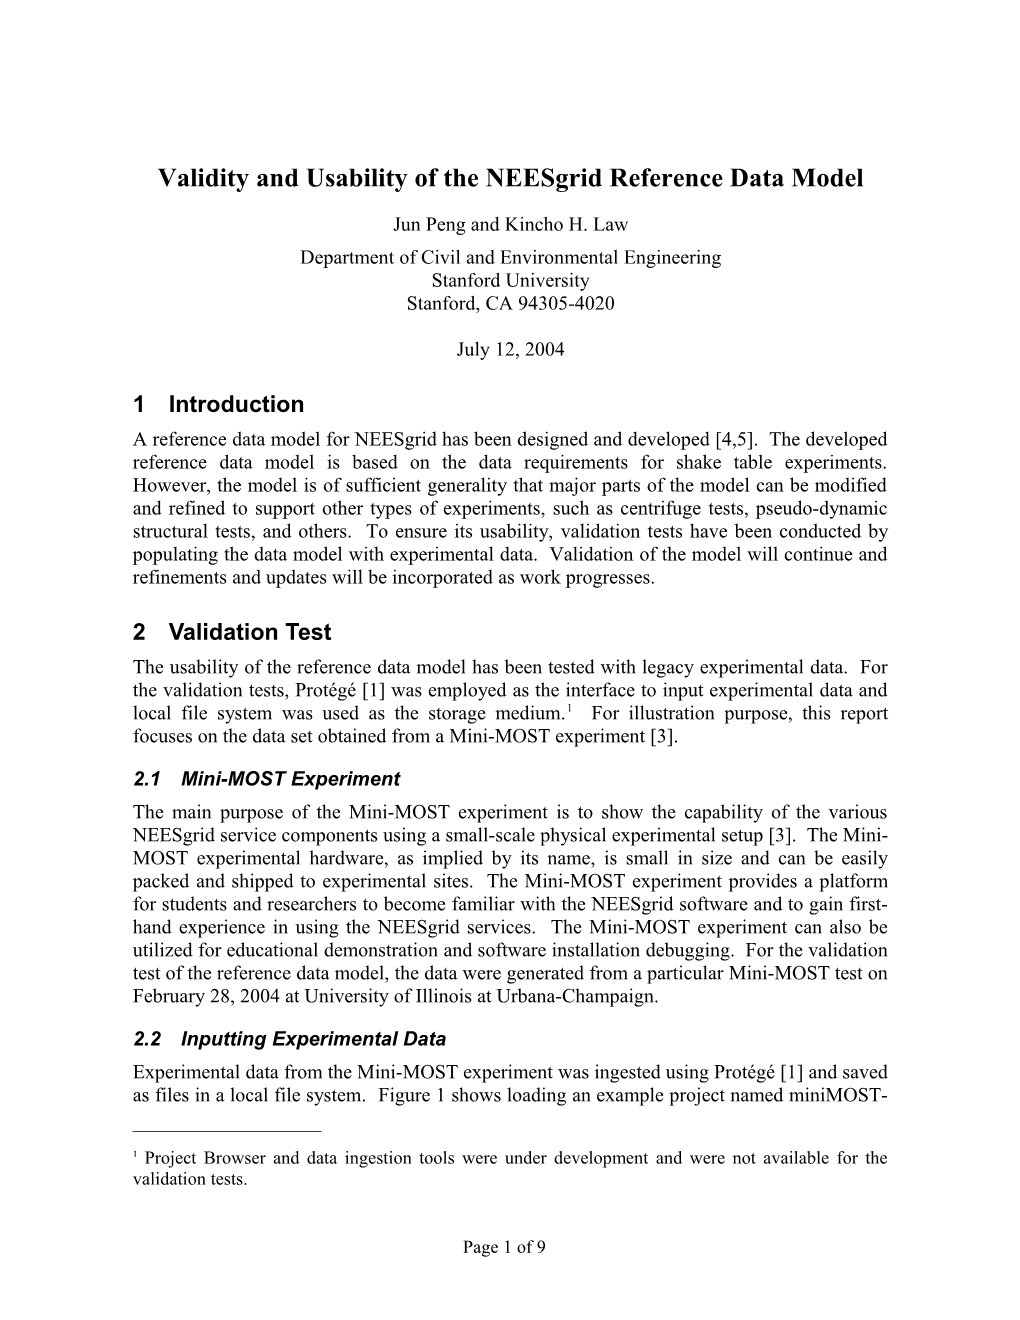 Validity and Usability of the Neesgrid Data Model